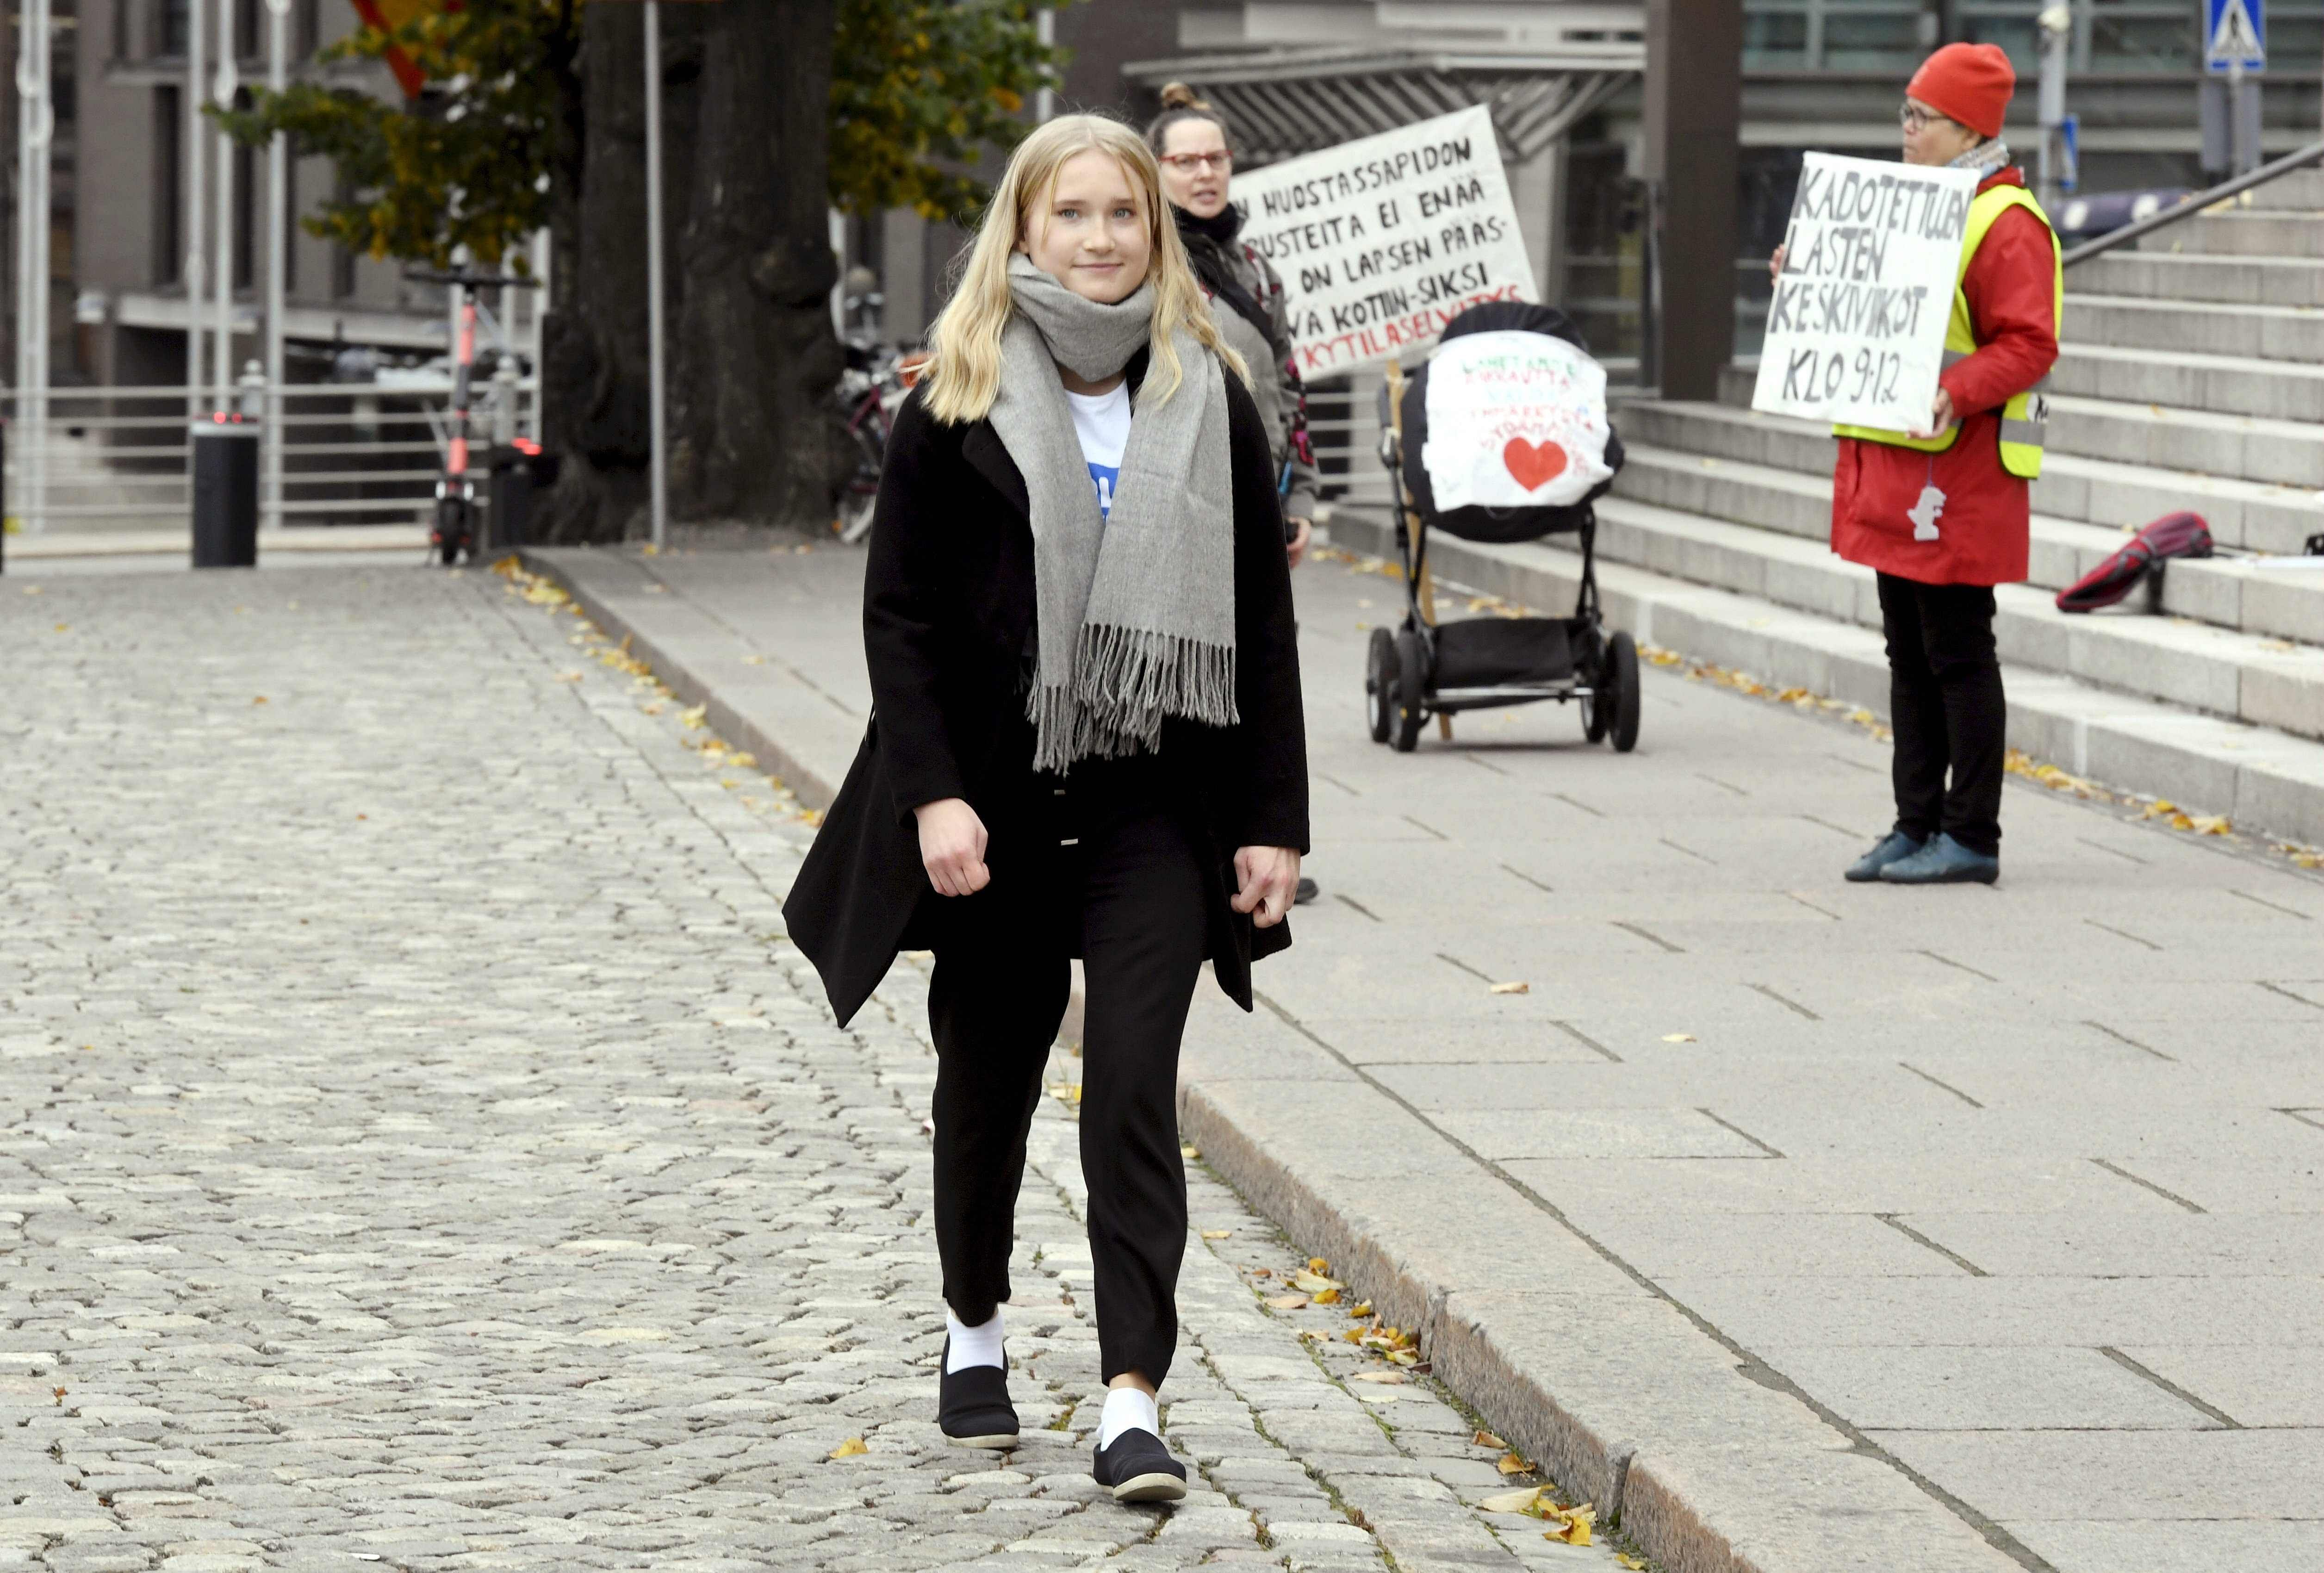 16-year-old Aava Murto took over the job of Finnish Prime Minister Sanna Marin for one day in Helsinki, Finland, on October 7, 2020 for the "Girls Takeover" campaign. Credit: AFP Photo